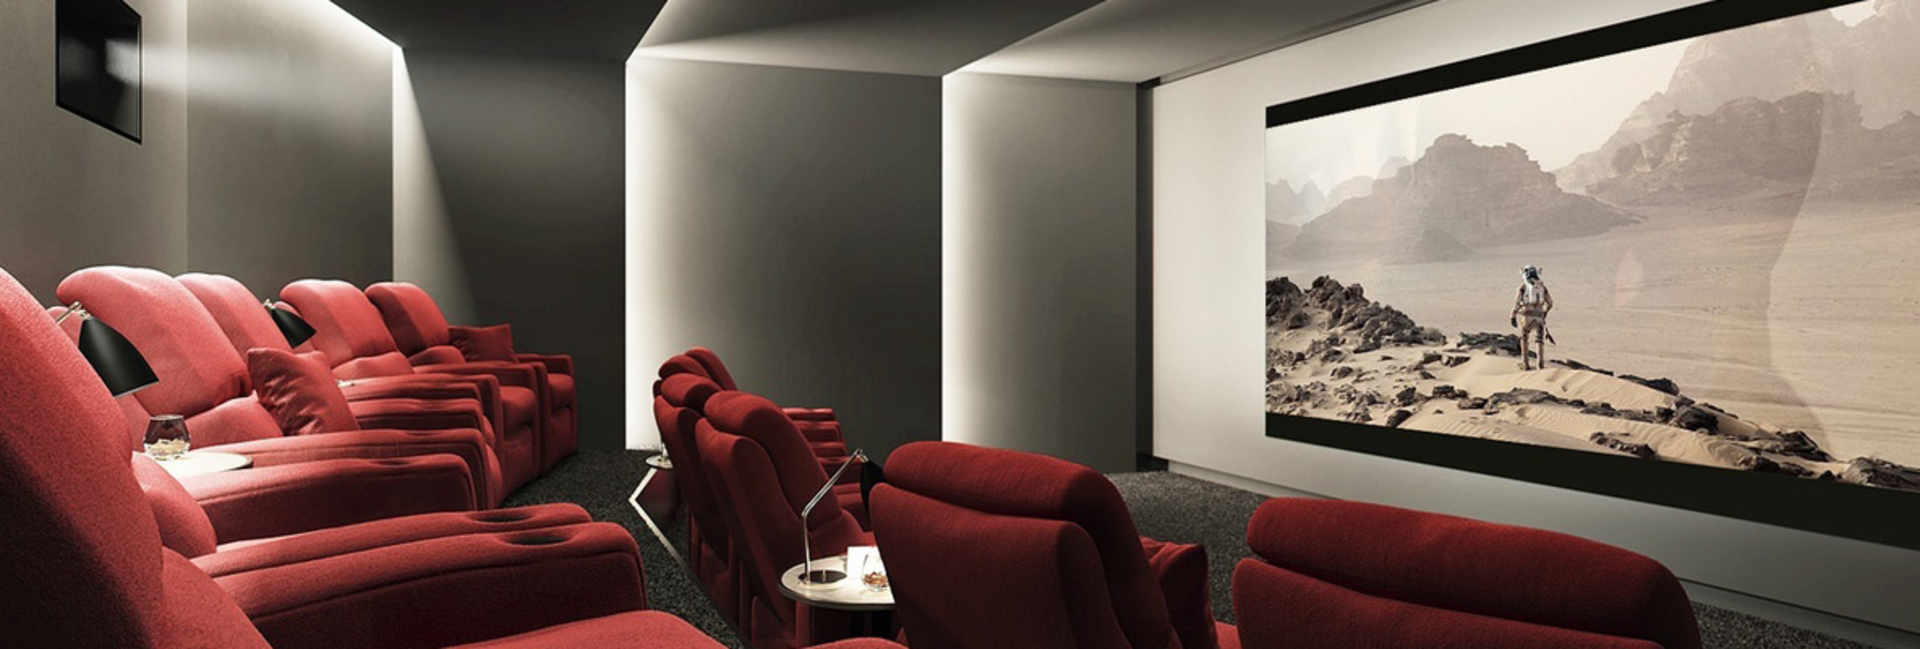 Five tips for creating your dream home cinema - Header | Berkeley Inspirations